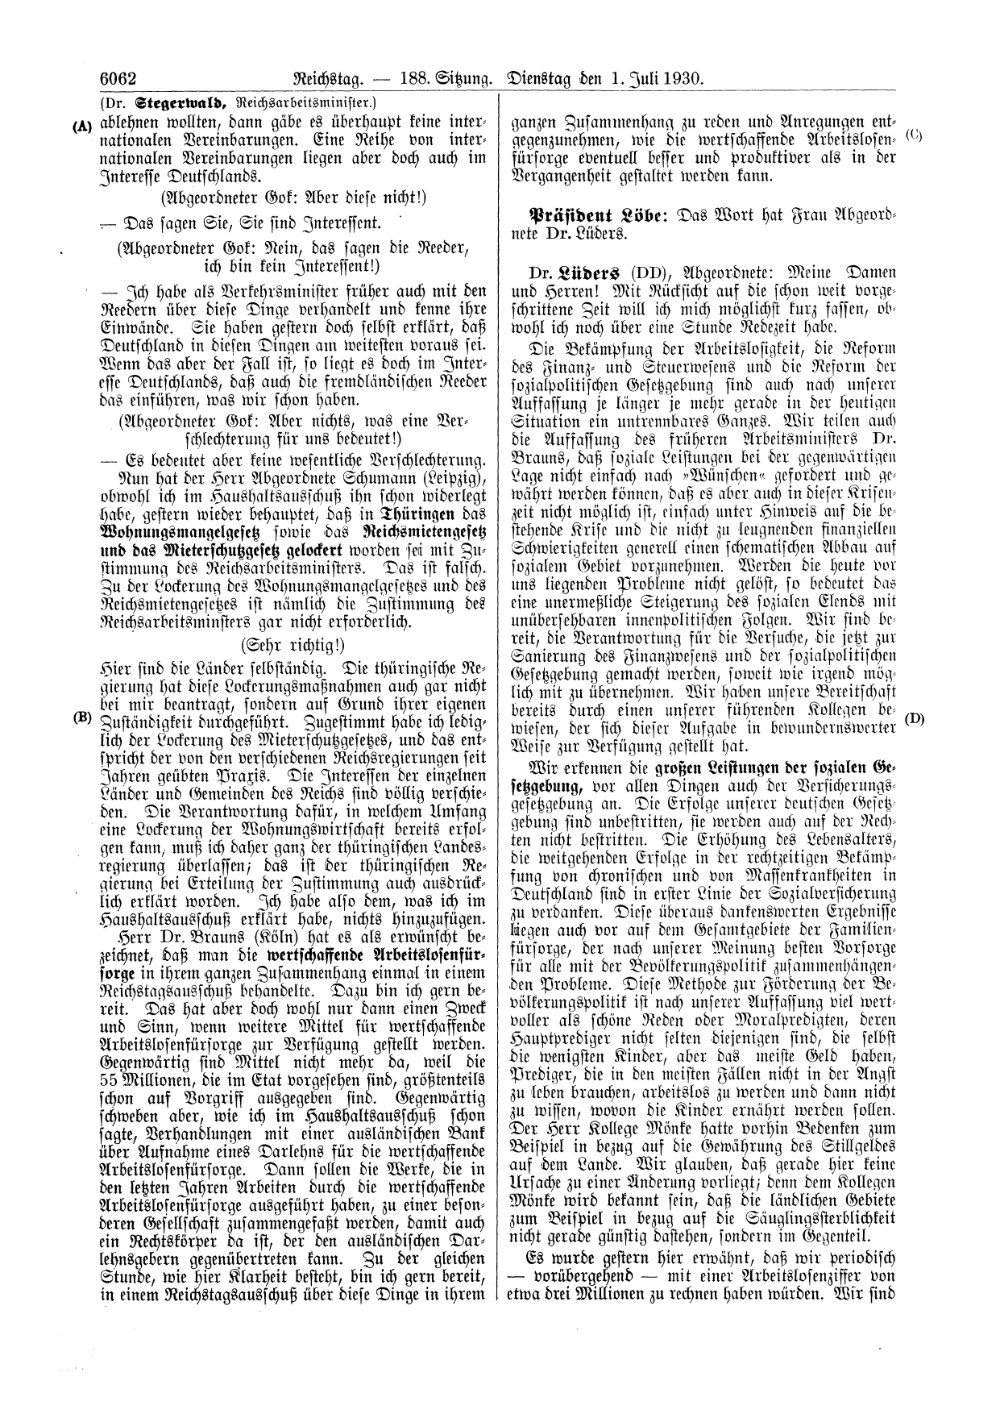 Scan of page 6062